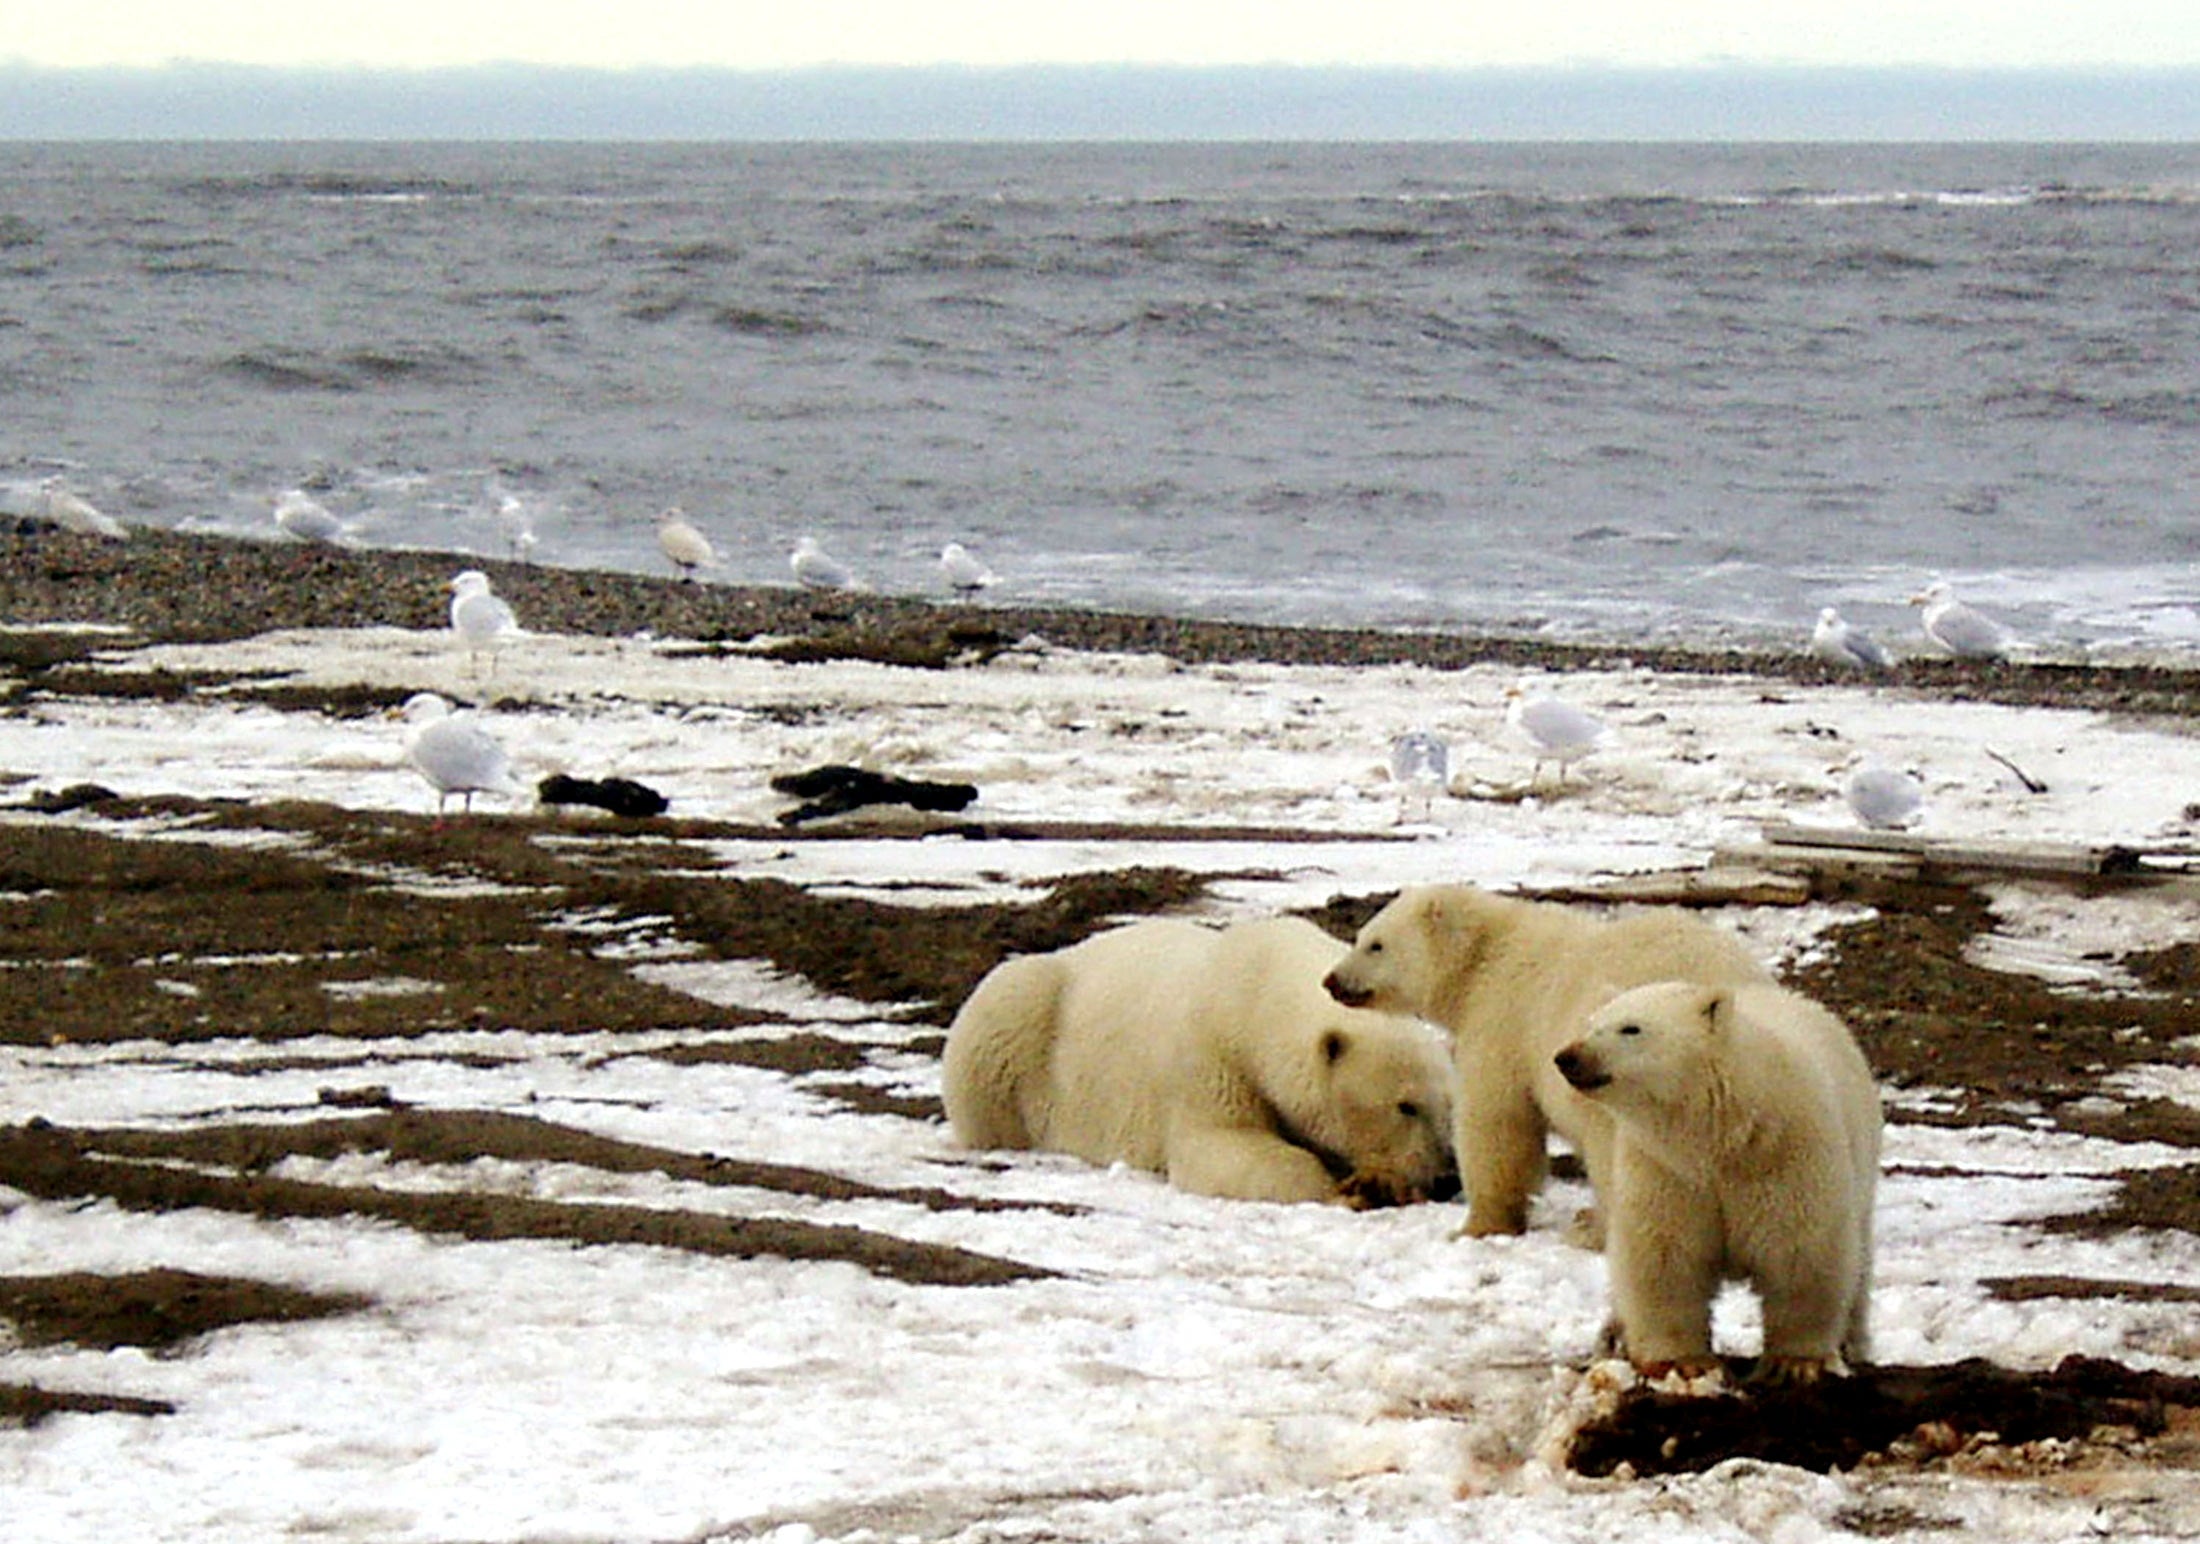 A polar bear sow and two cubs are seen on the Beaufort Sea coast within the 1002 Area of the Arctic National Wildlife Refuge in this undated handout photo provided by the U.S. Fish and Wildlife Service